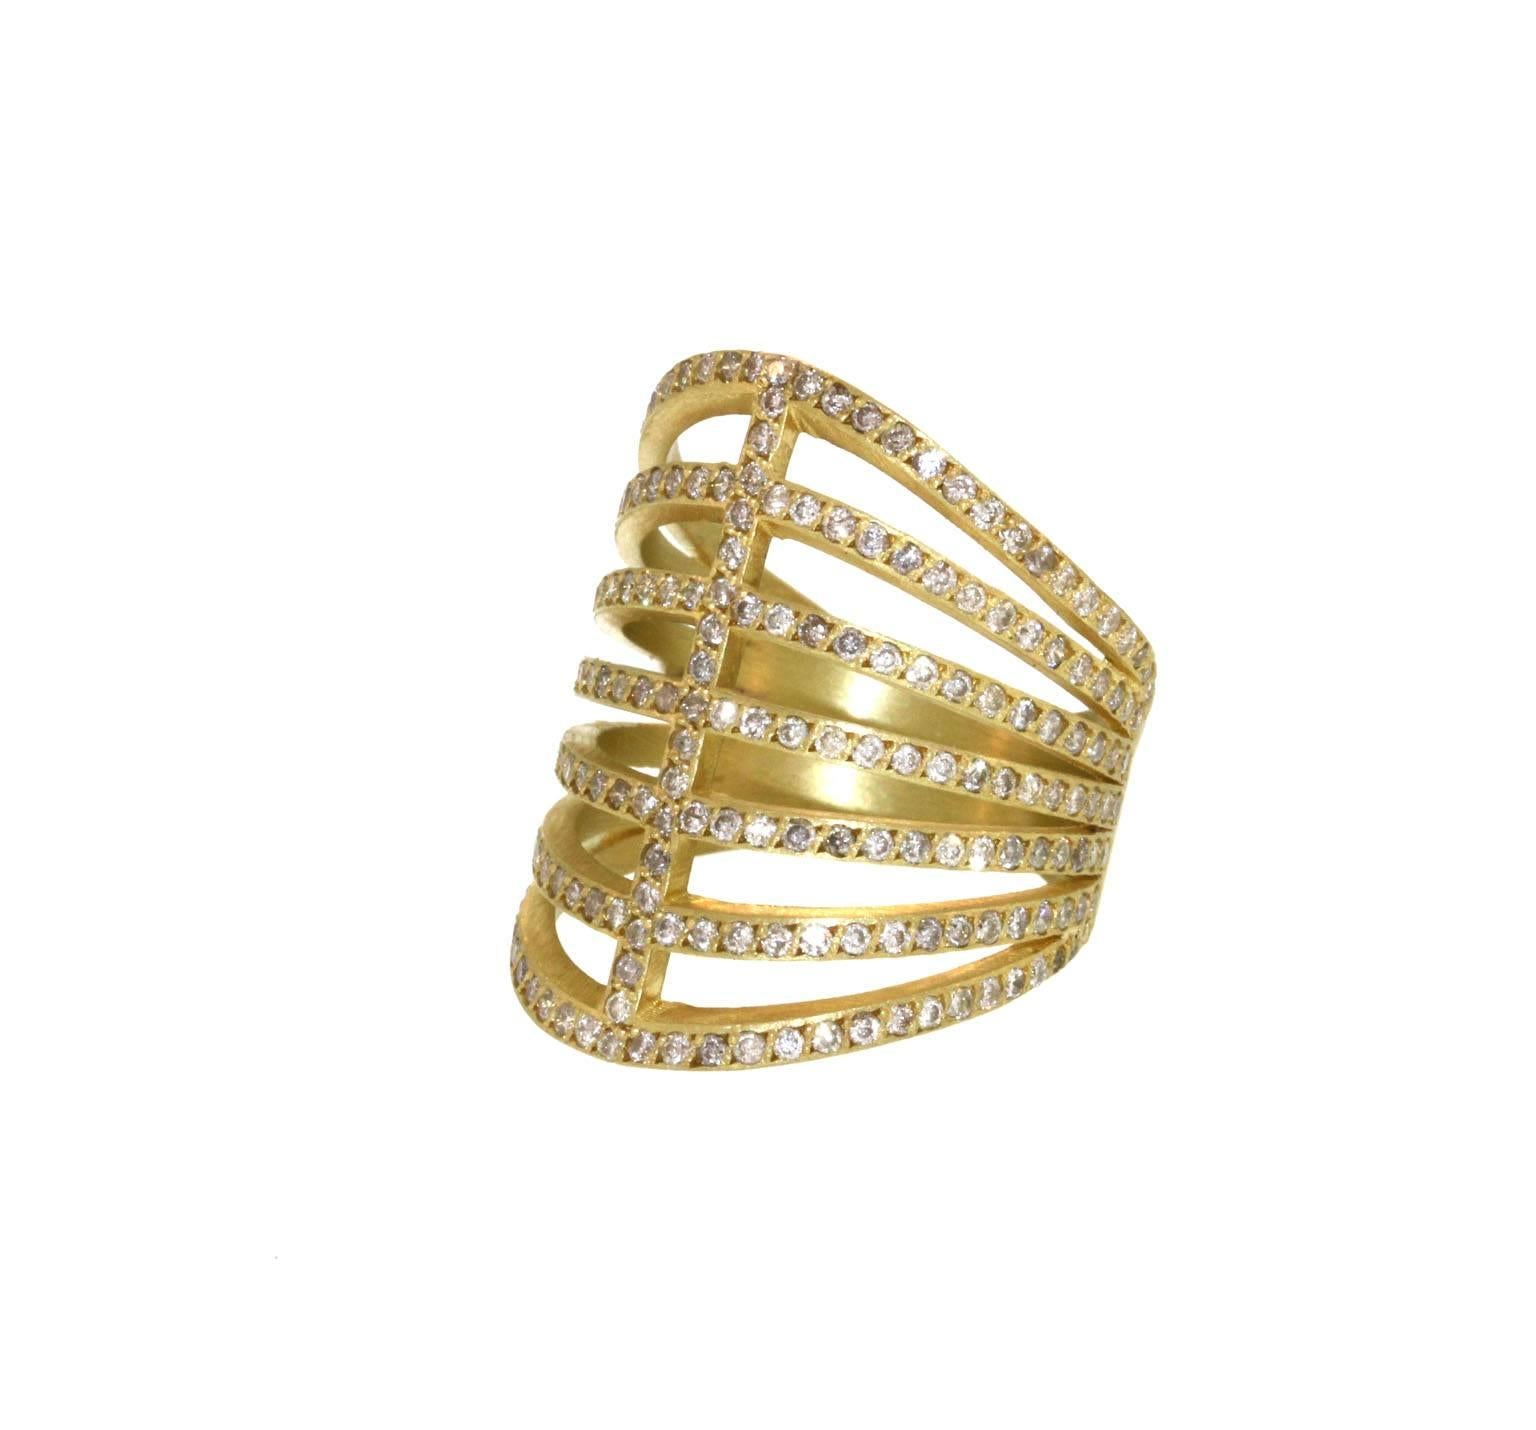 Both feminine and structured, this corset-like, sparkly pavé diamond ring wraps around the finger delicately. This piece is composed of seven static 2mm wide, brilliant pavé diamond bands. It measures 25mm in length, and tapers to 5mm in the back,